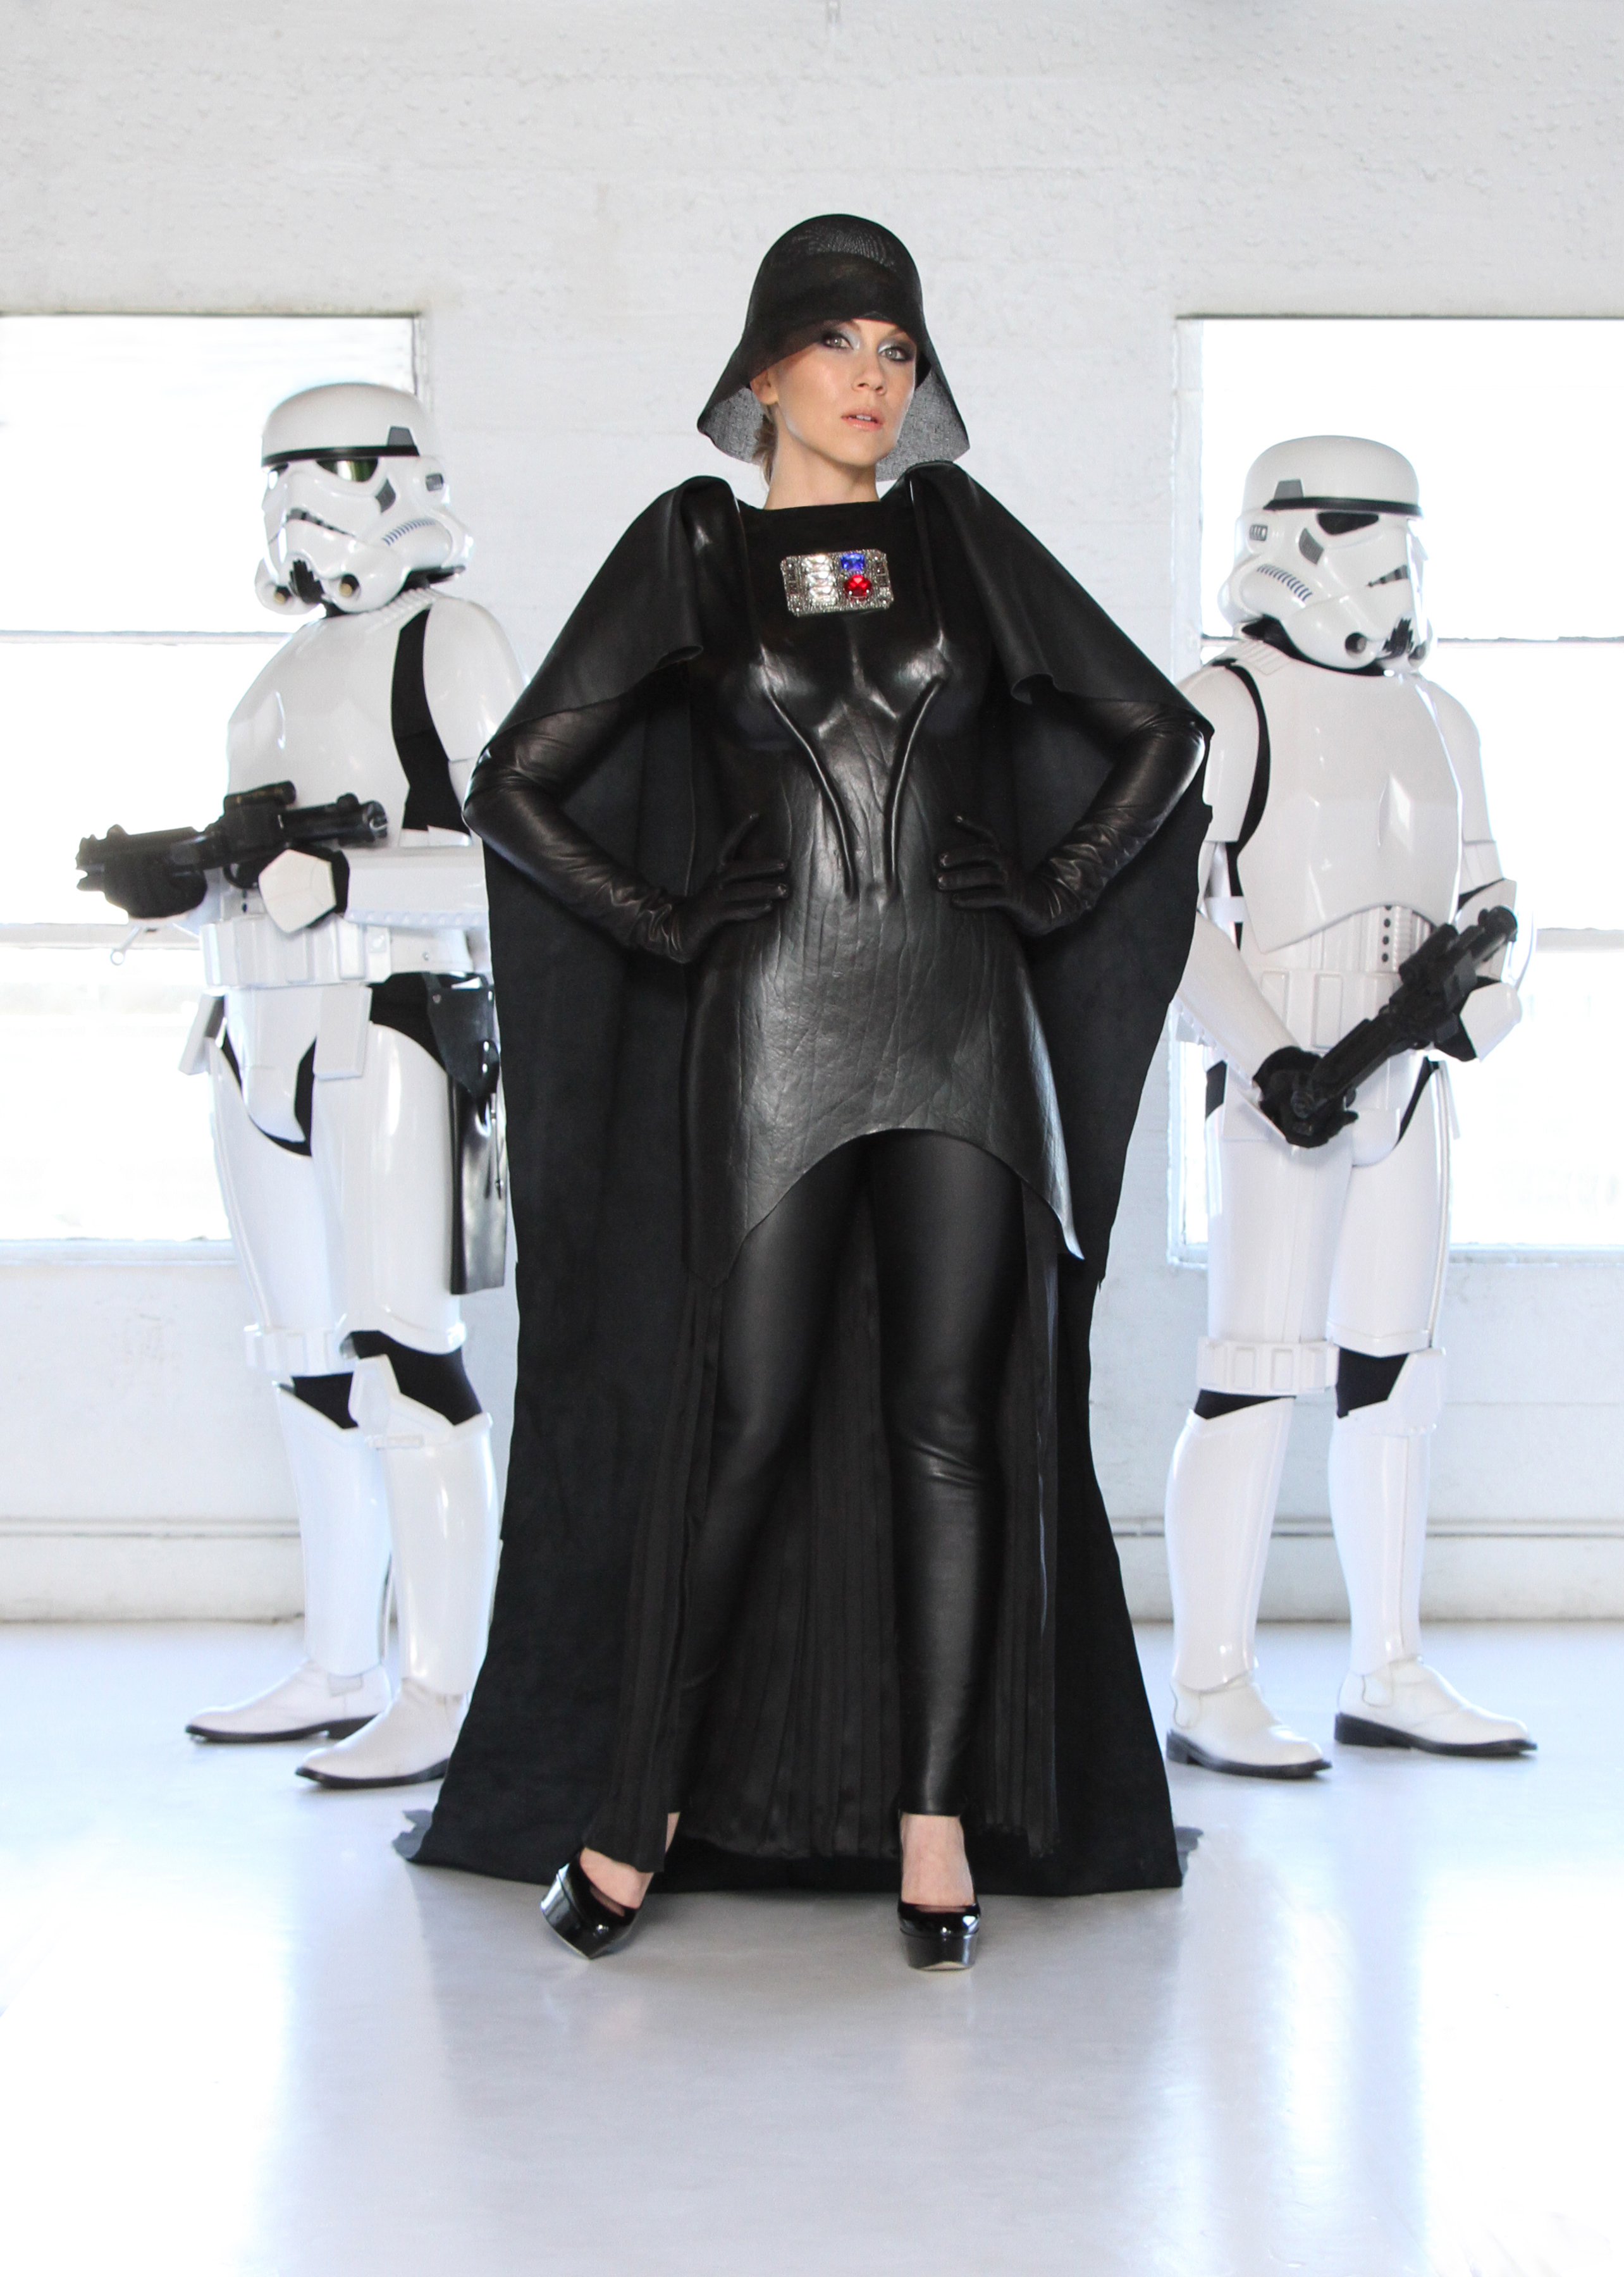 Ashley Eckstein poses in a geek couture Darth Vader outfit to promote the Comic-Con fashion show (Her Universe)